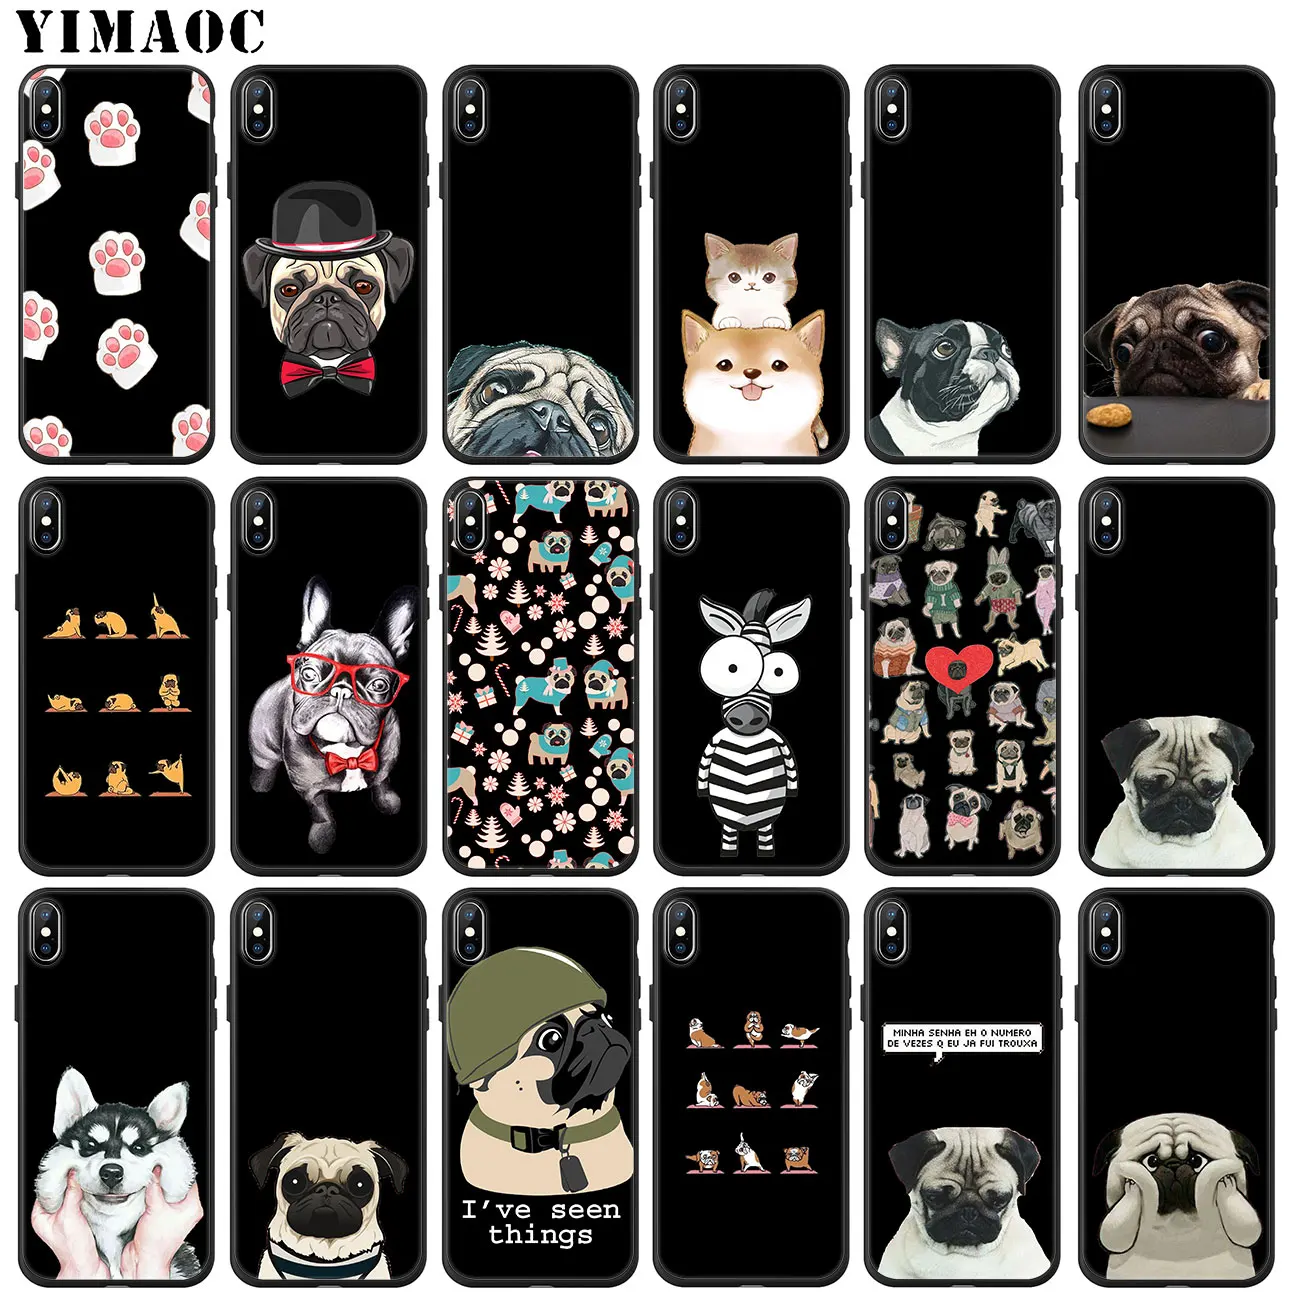 

YIMAOC dog Paw Husky pug cute Soft Silicone Phone Case for iPhone 11 Pro XS Max XR X 6 6S 7 8 Plus 5 5S SE 10 TPU Black Cover